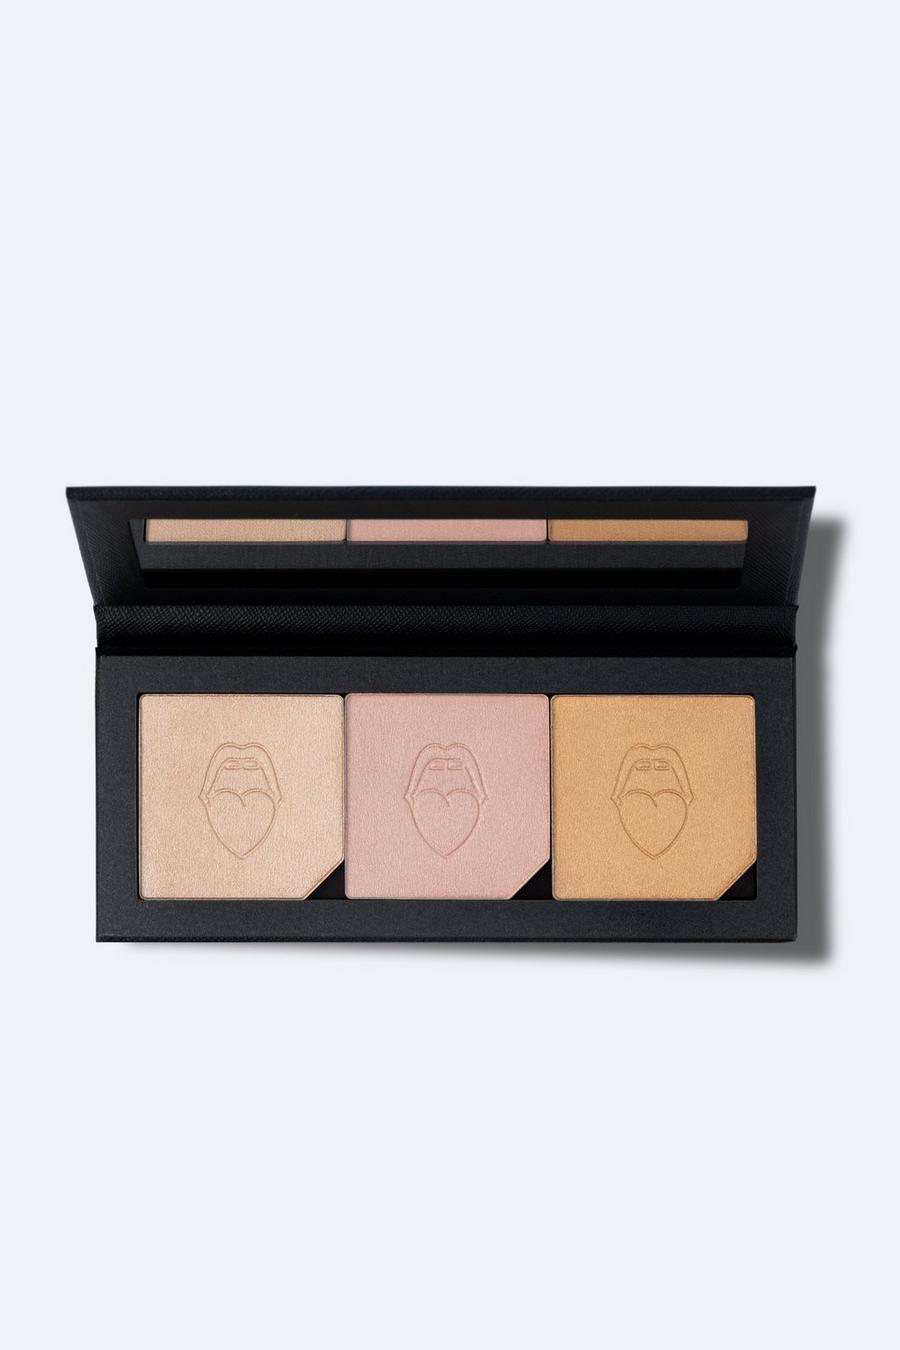 Nasty Gal Beauty Face Palette Trio